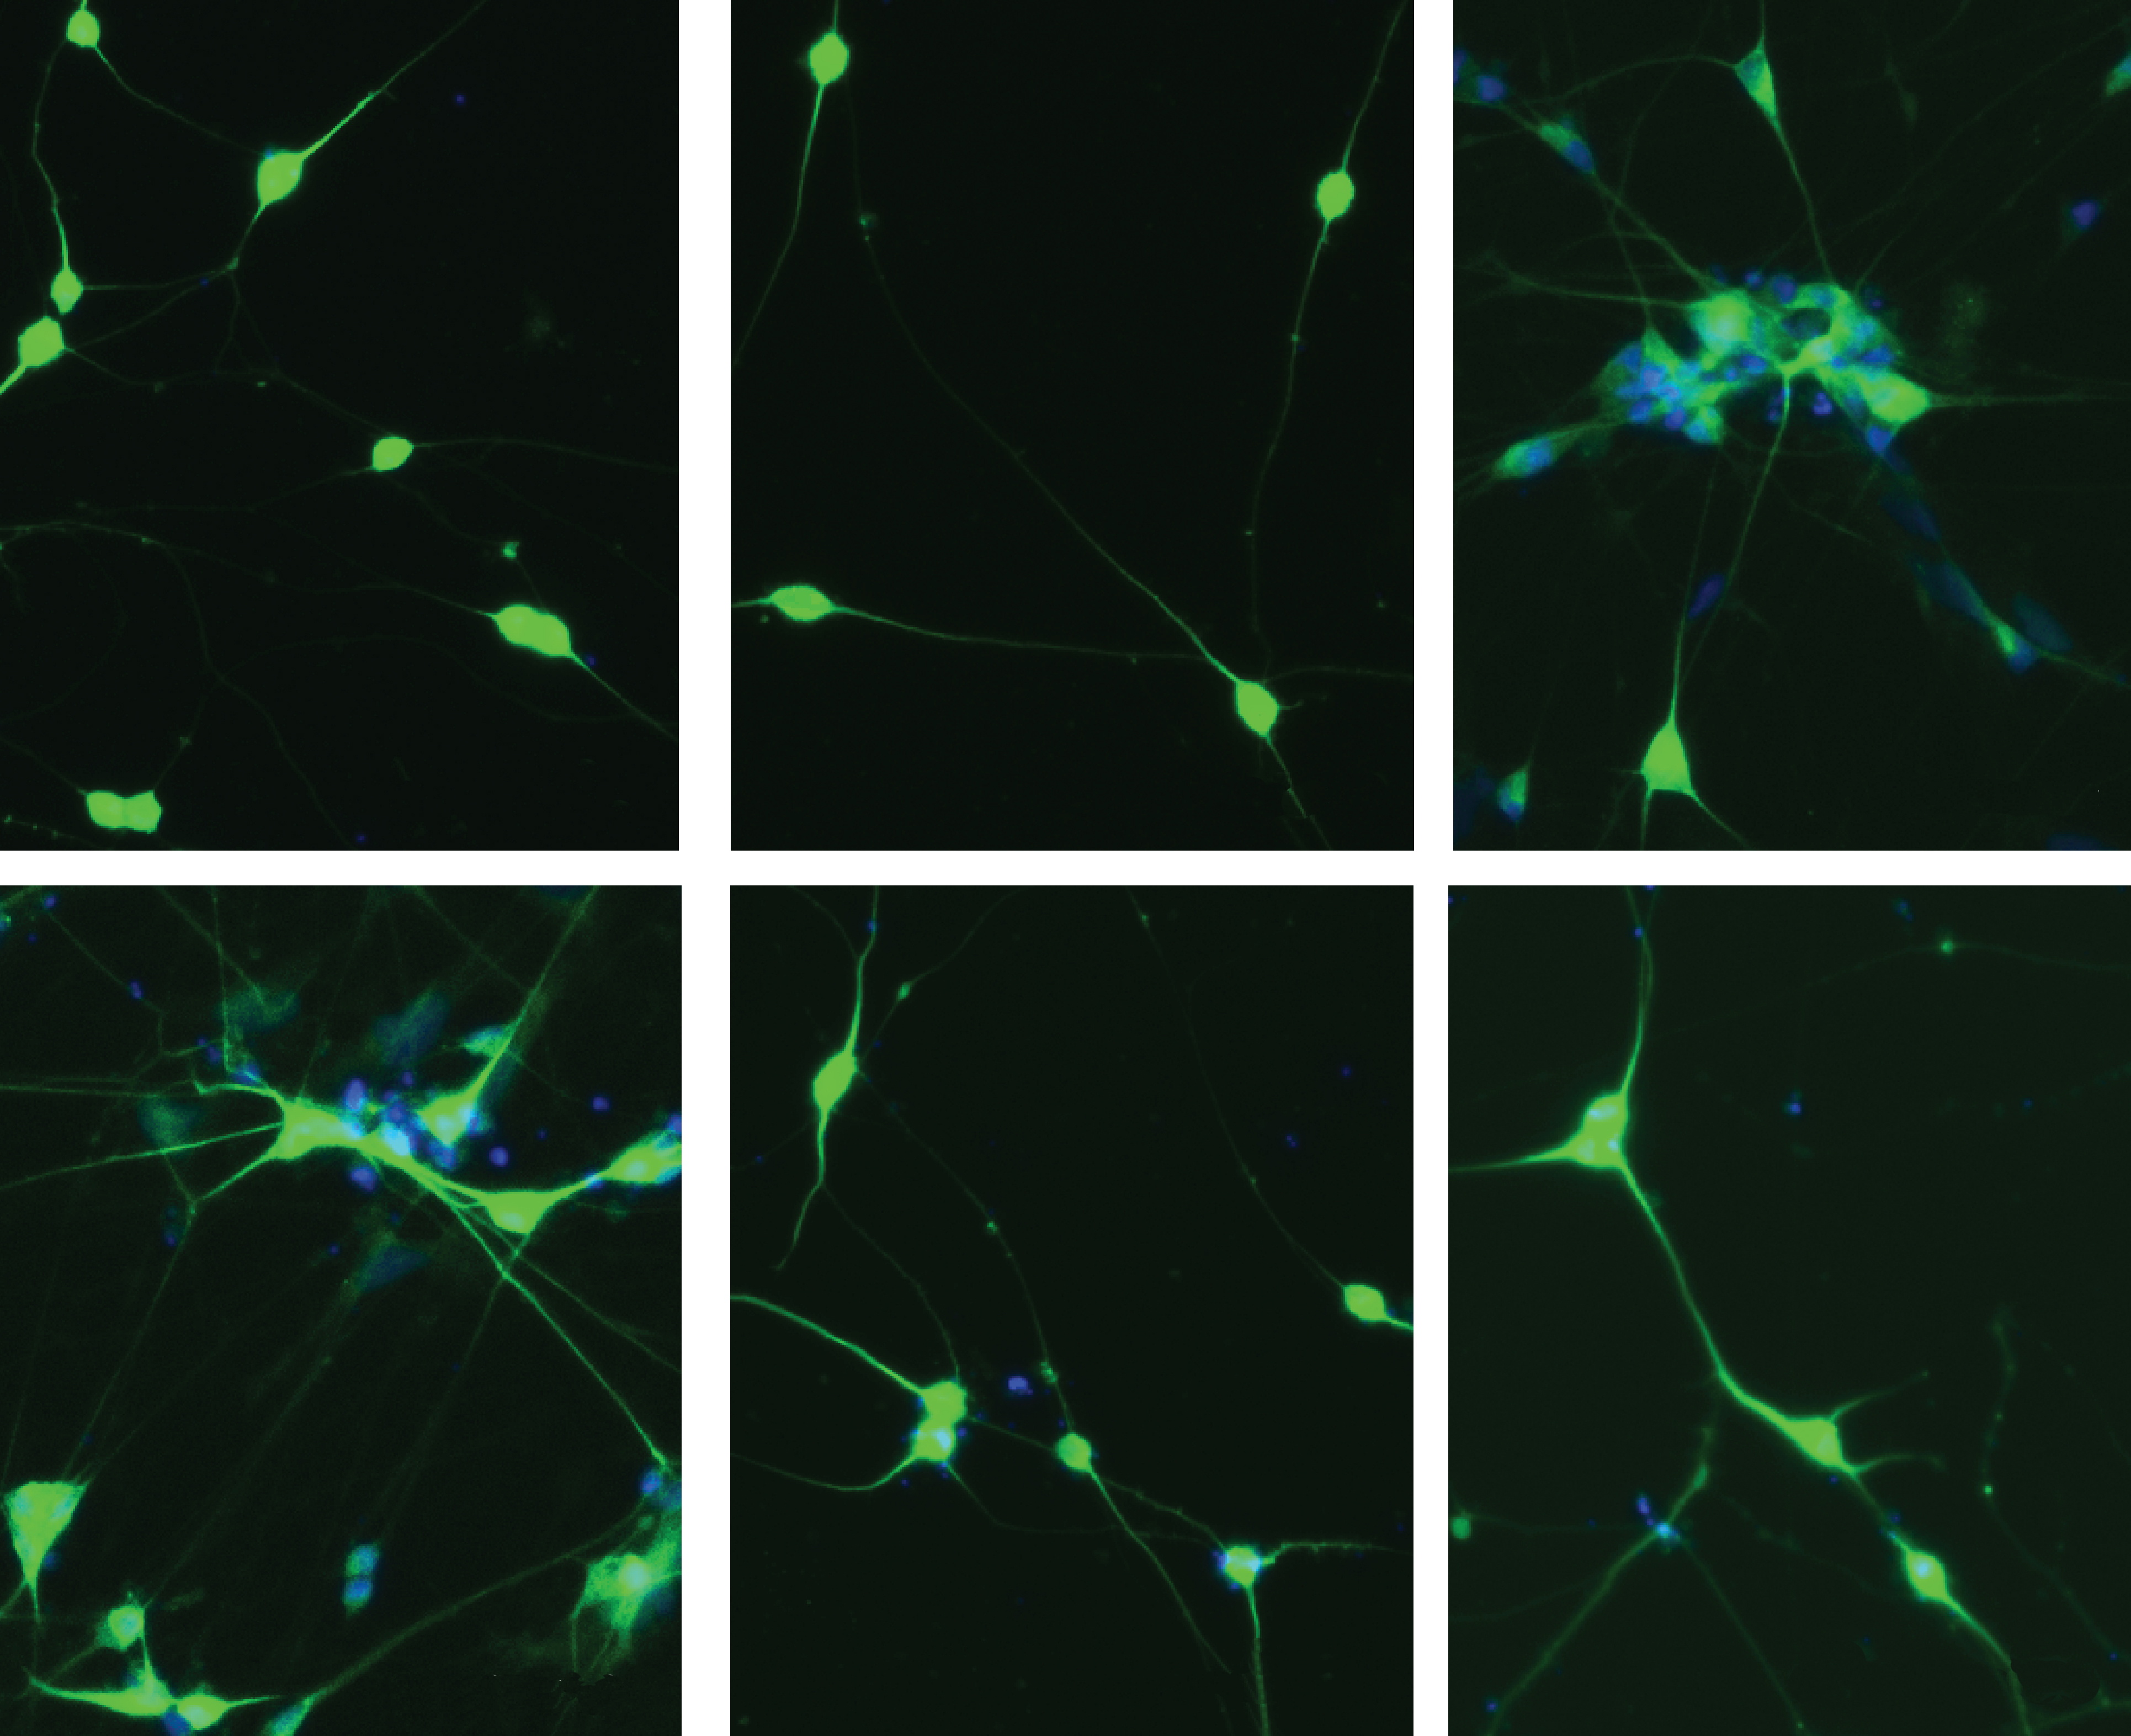 Neurons (green) generated from a human stem-cell line carry one of six mutations associated with schizophrenia, autism or intellectual disability.